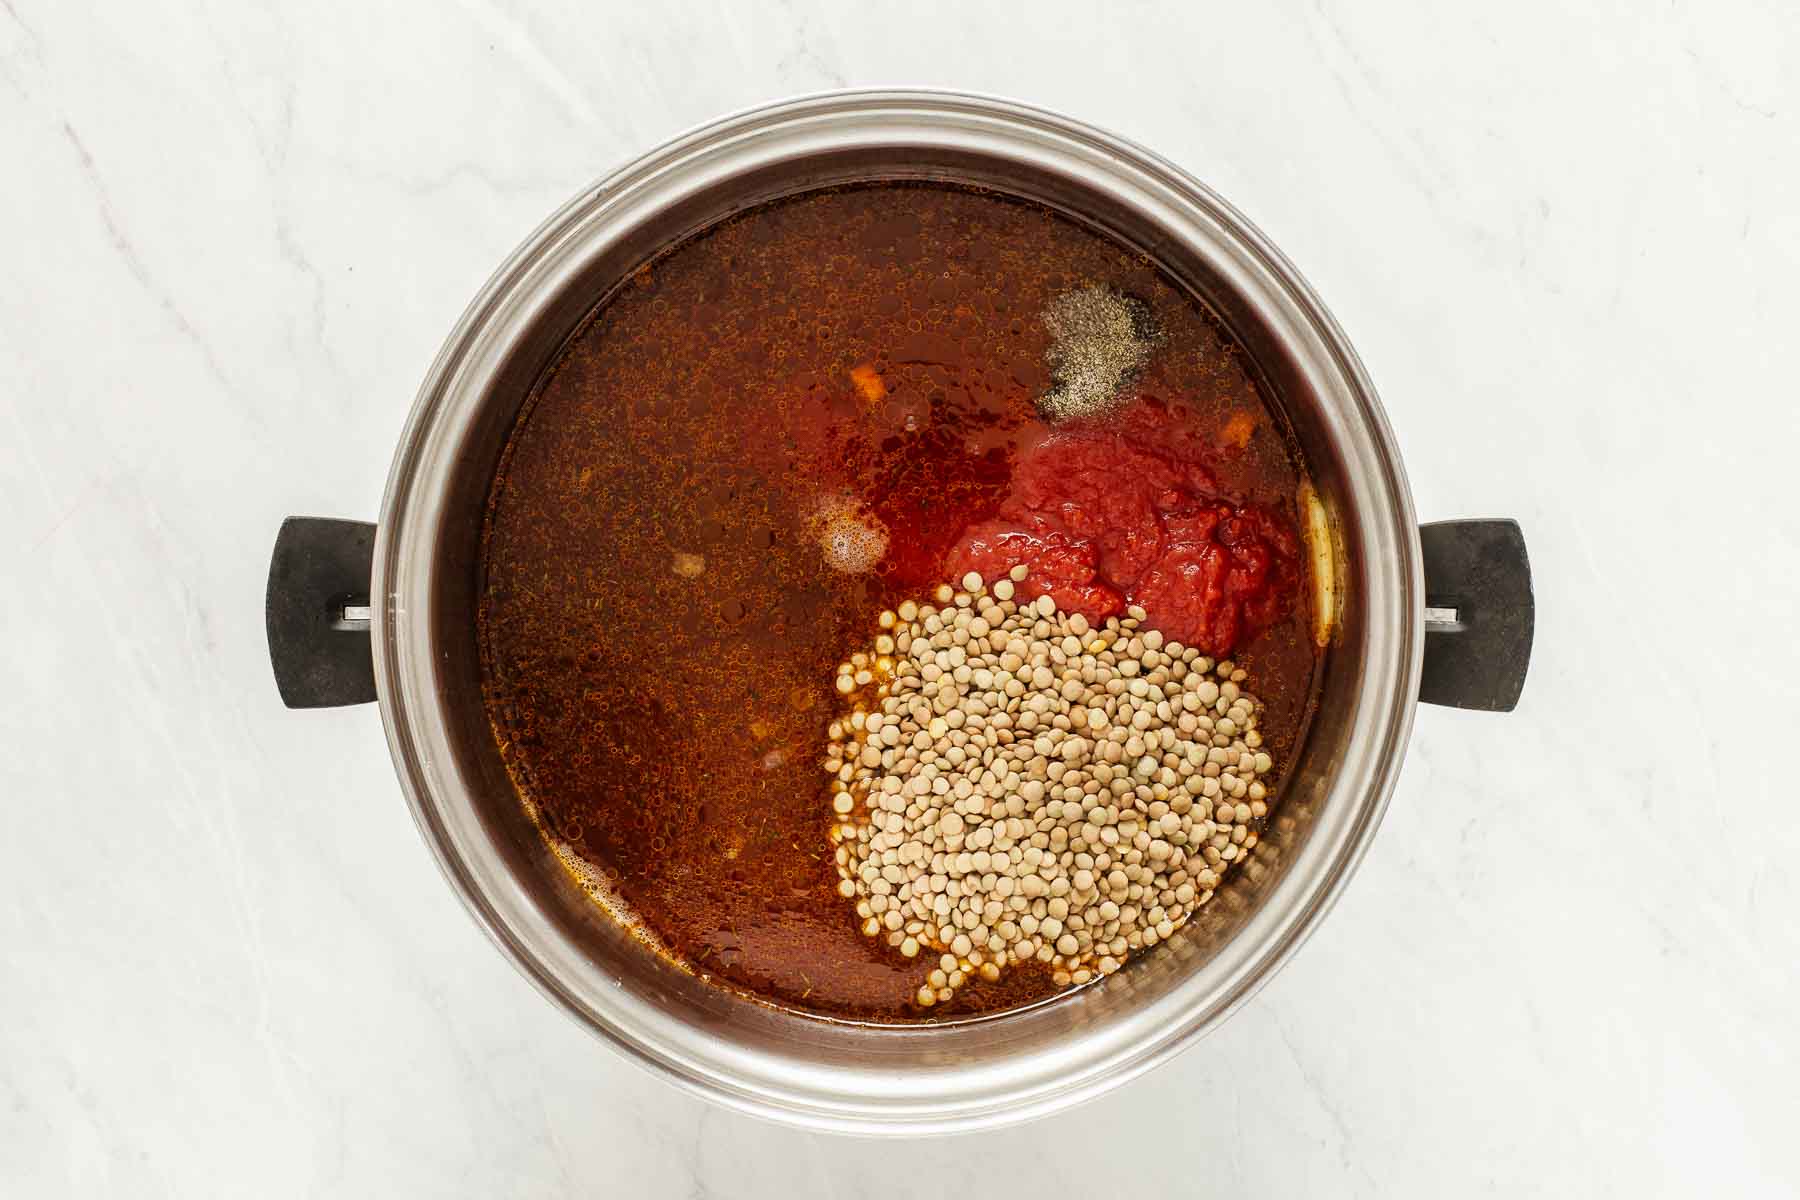 Pot of soup with crushed tomatoes, lentil and spices being stirred together.